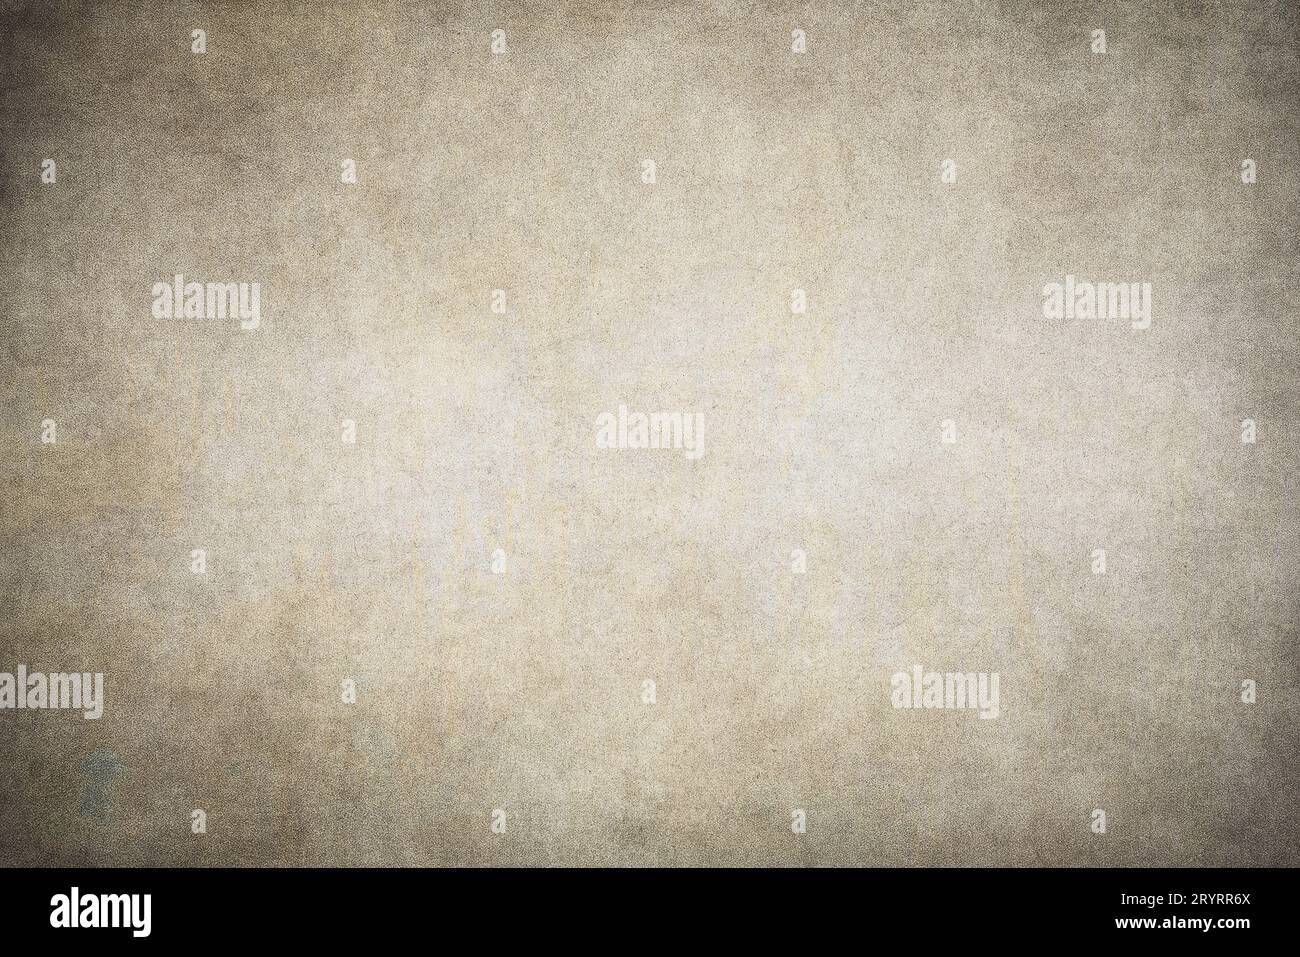 High quality paper texture background Patterns that reflect the